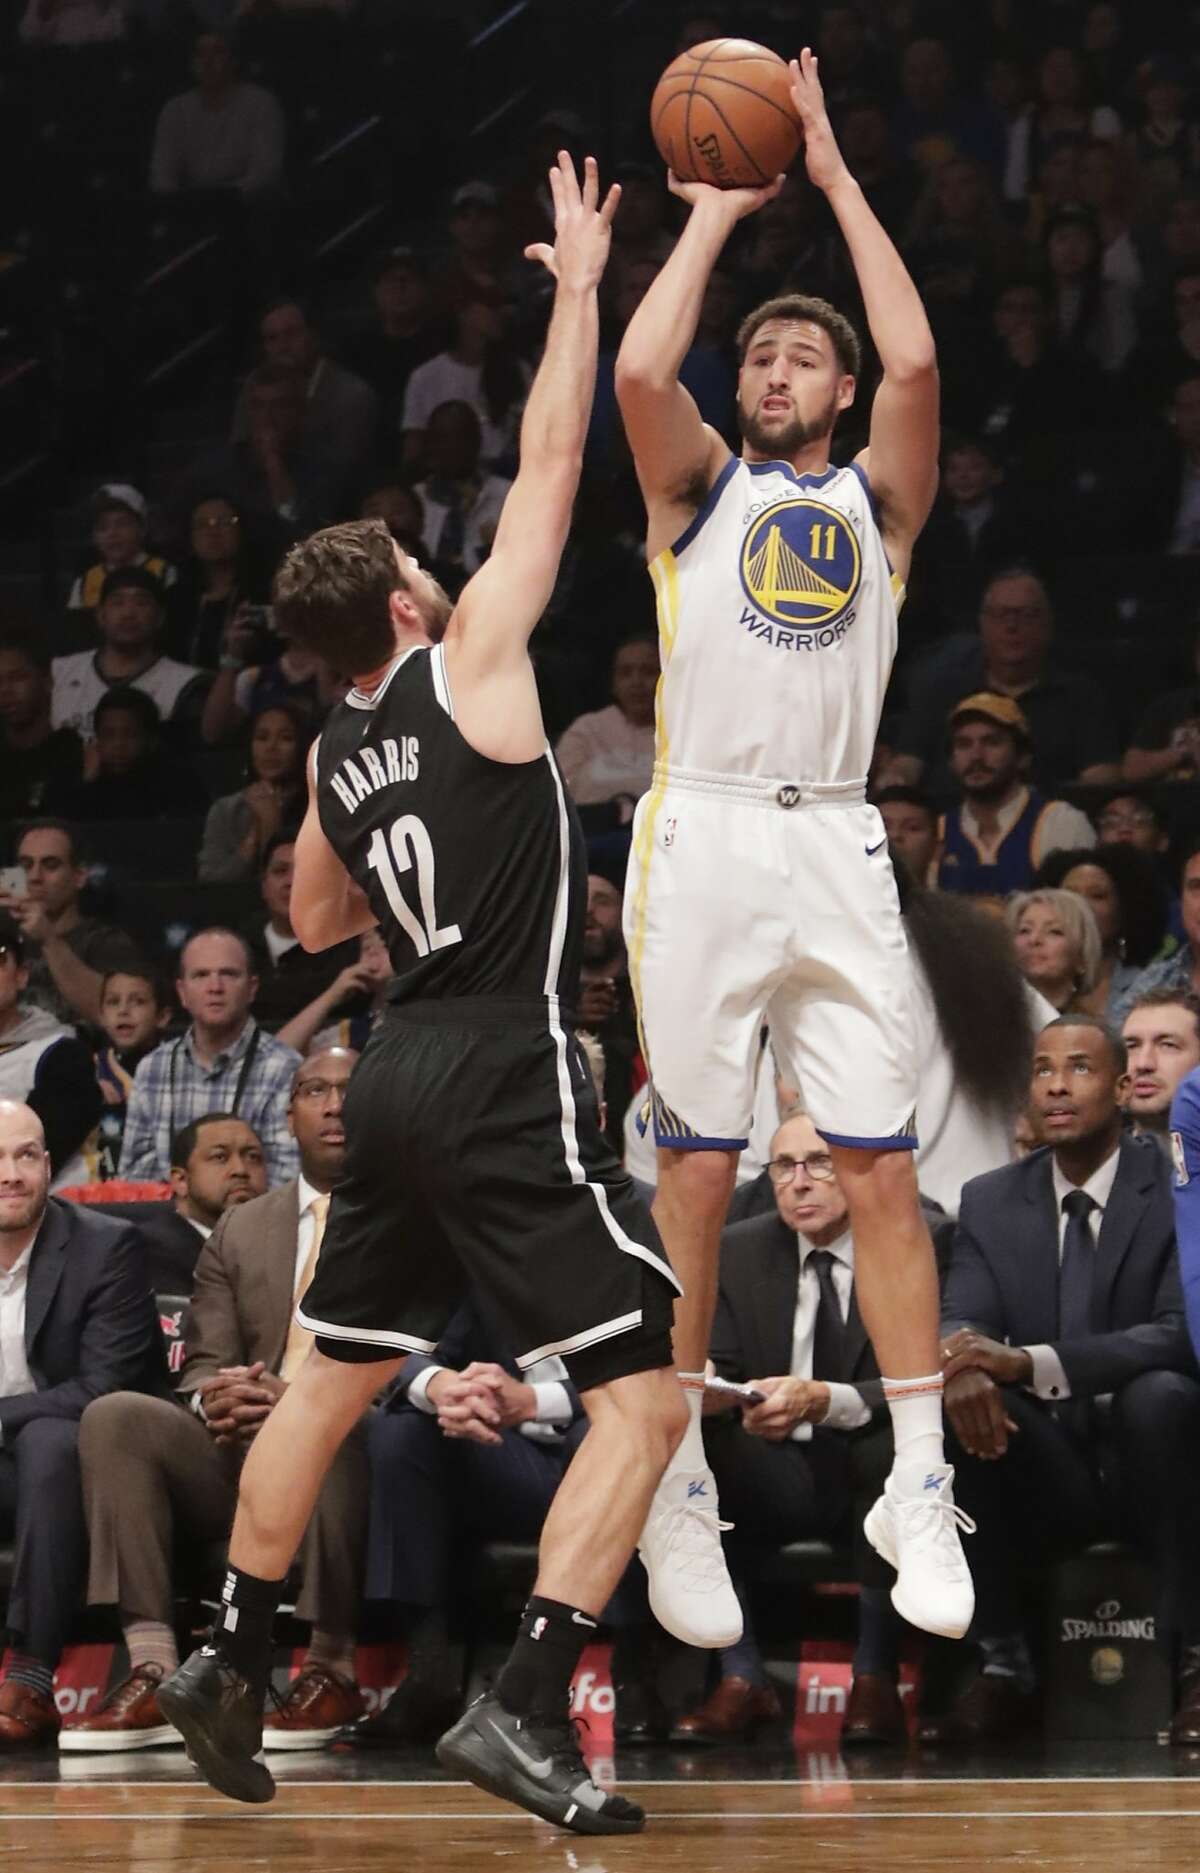 Golden State Warriors' Klay Thompson (11) shoots over Brooklyn Nets' Joe Harris (12) during the first half of an NBA basketball game Sunday, Oct. 28, 2018, in New York. (AP Photo/Frank Franklin II)